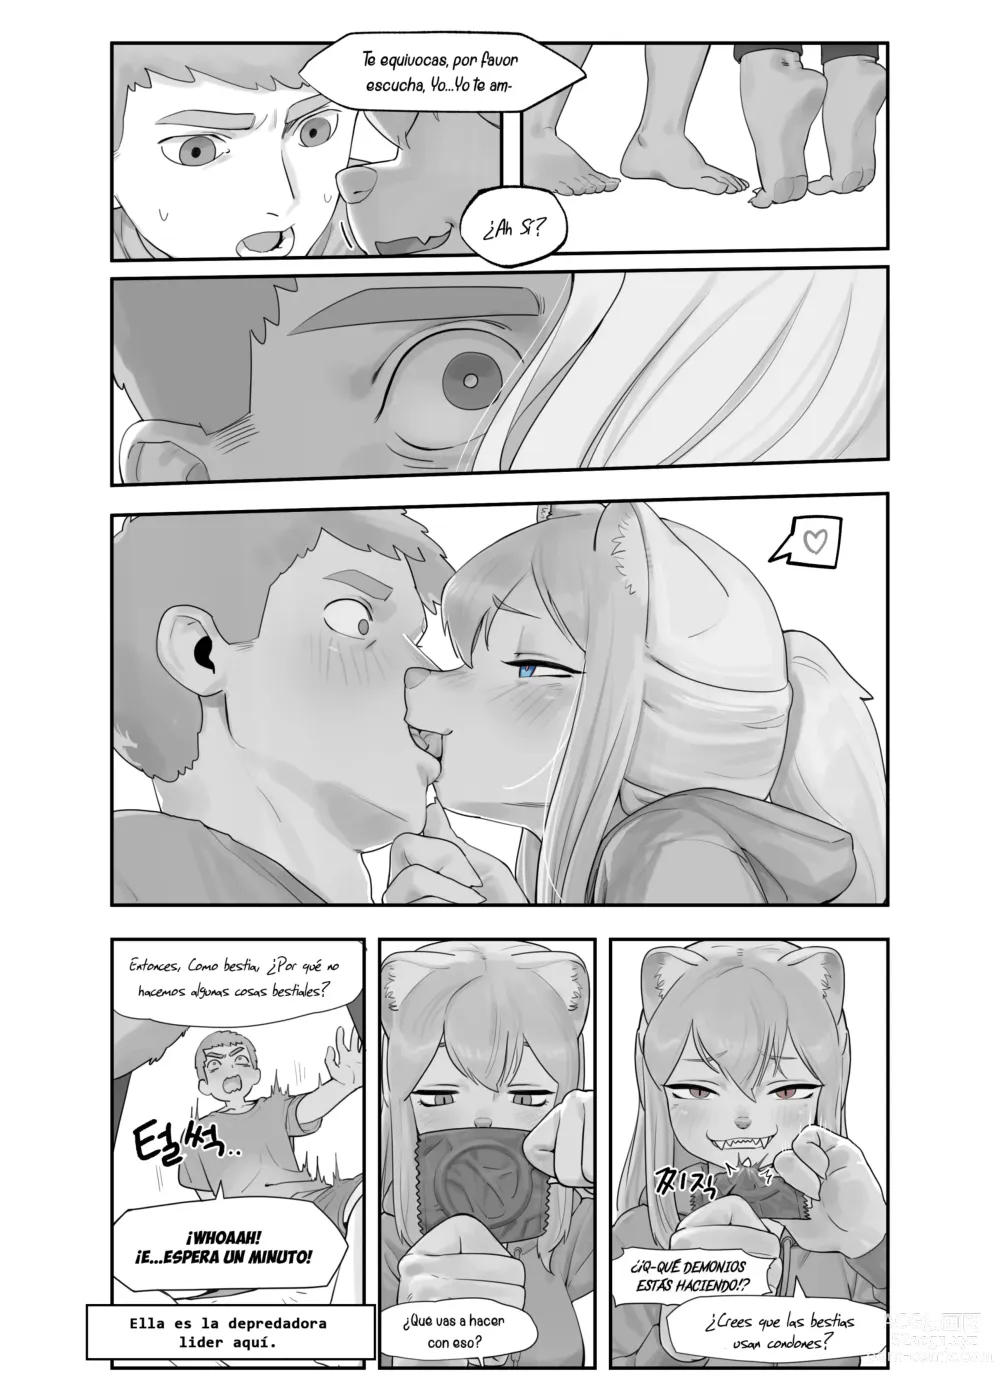 Page 4 of doujinshi A Suspiciously Erotic Childhood Friend (uncensored)